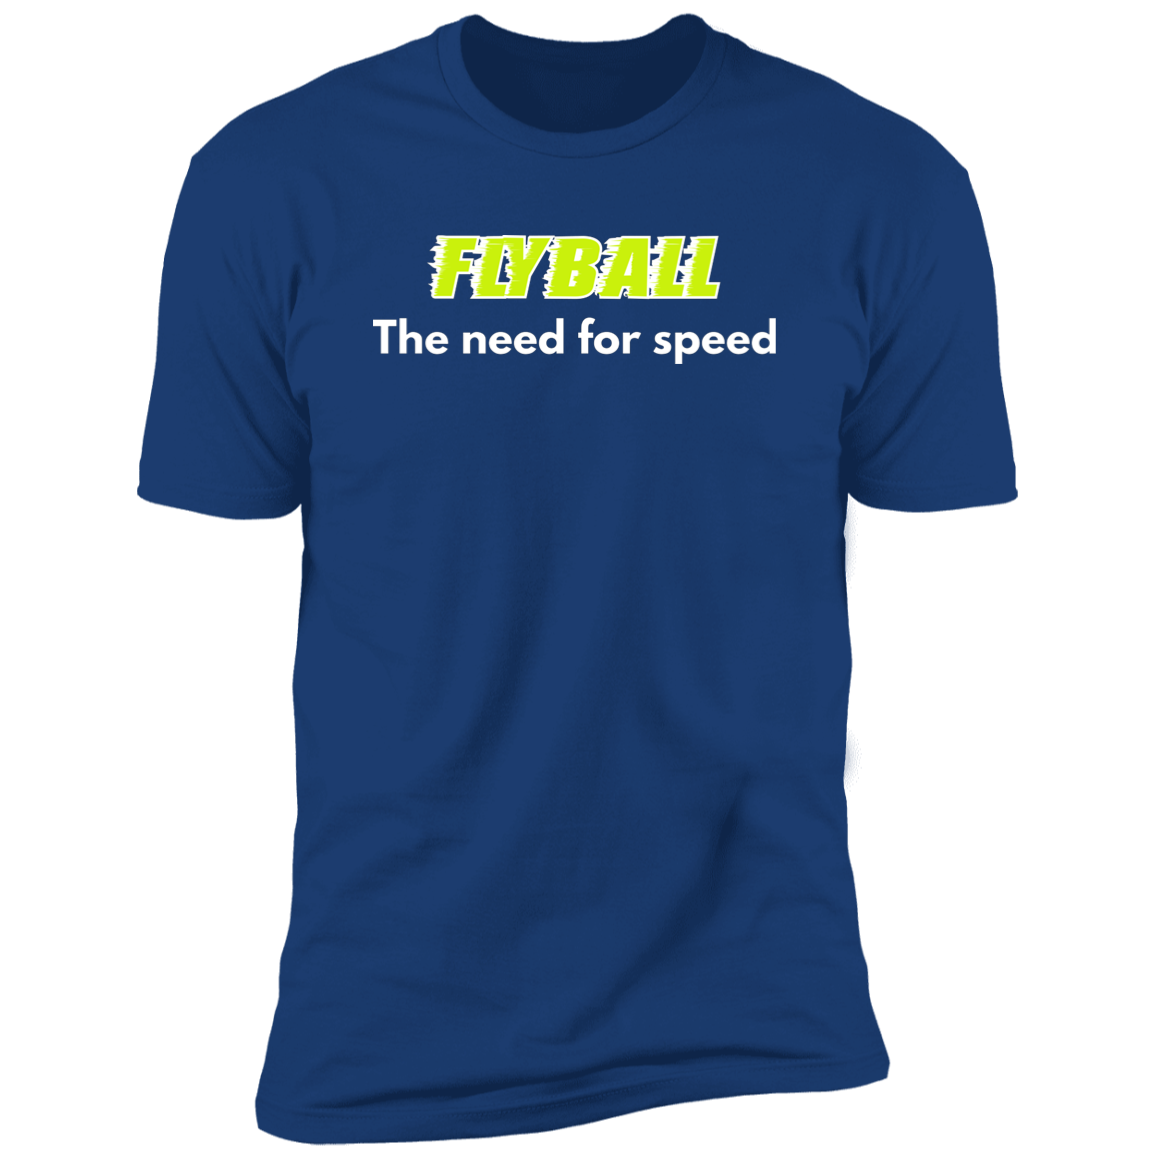 Flyball The Need For Speed dog shirt, dog shirt for humans, sporting dog shirt, in royal blue